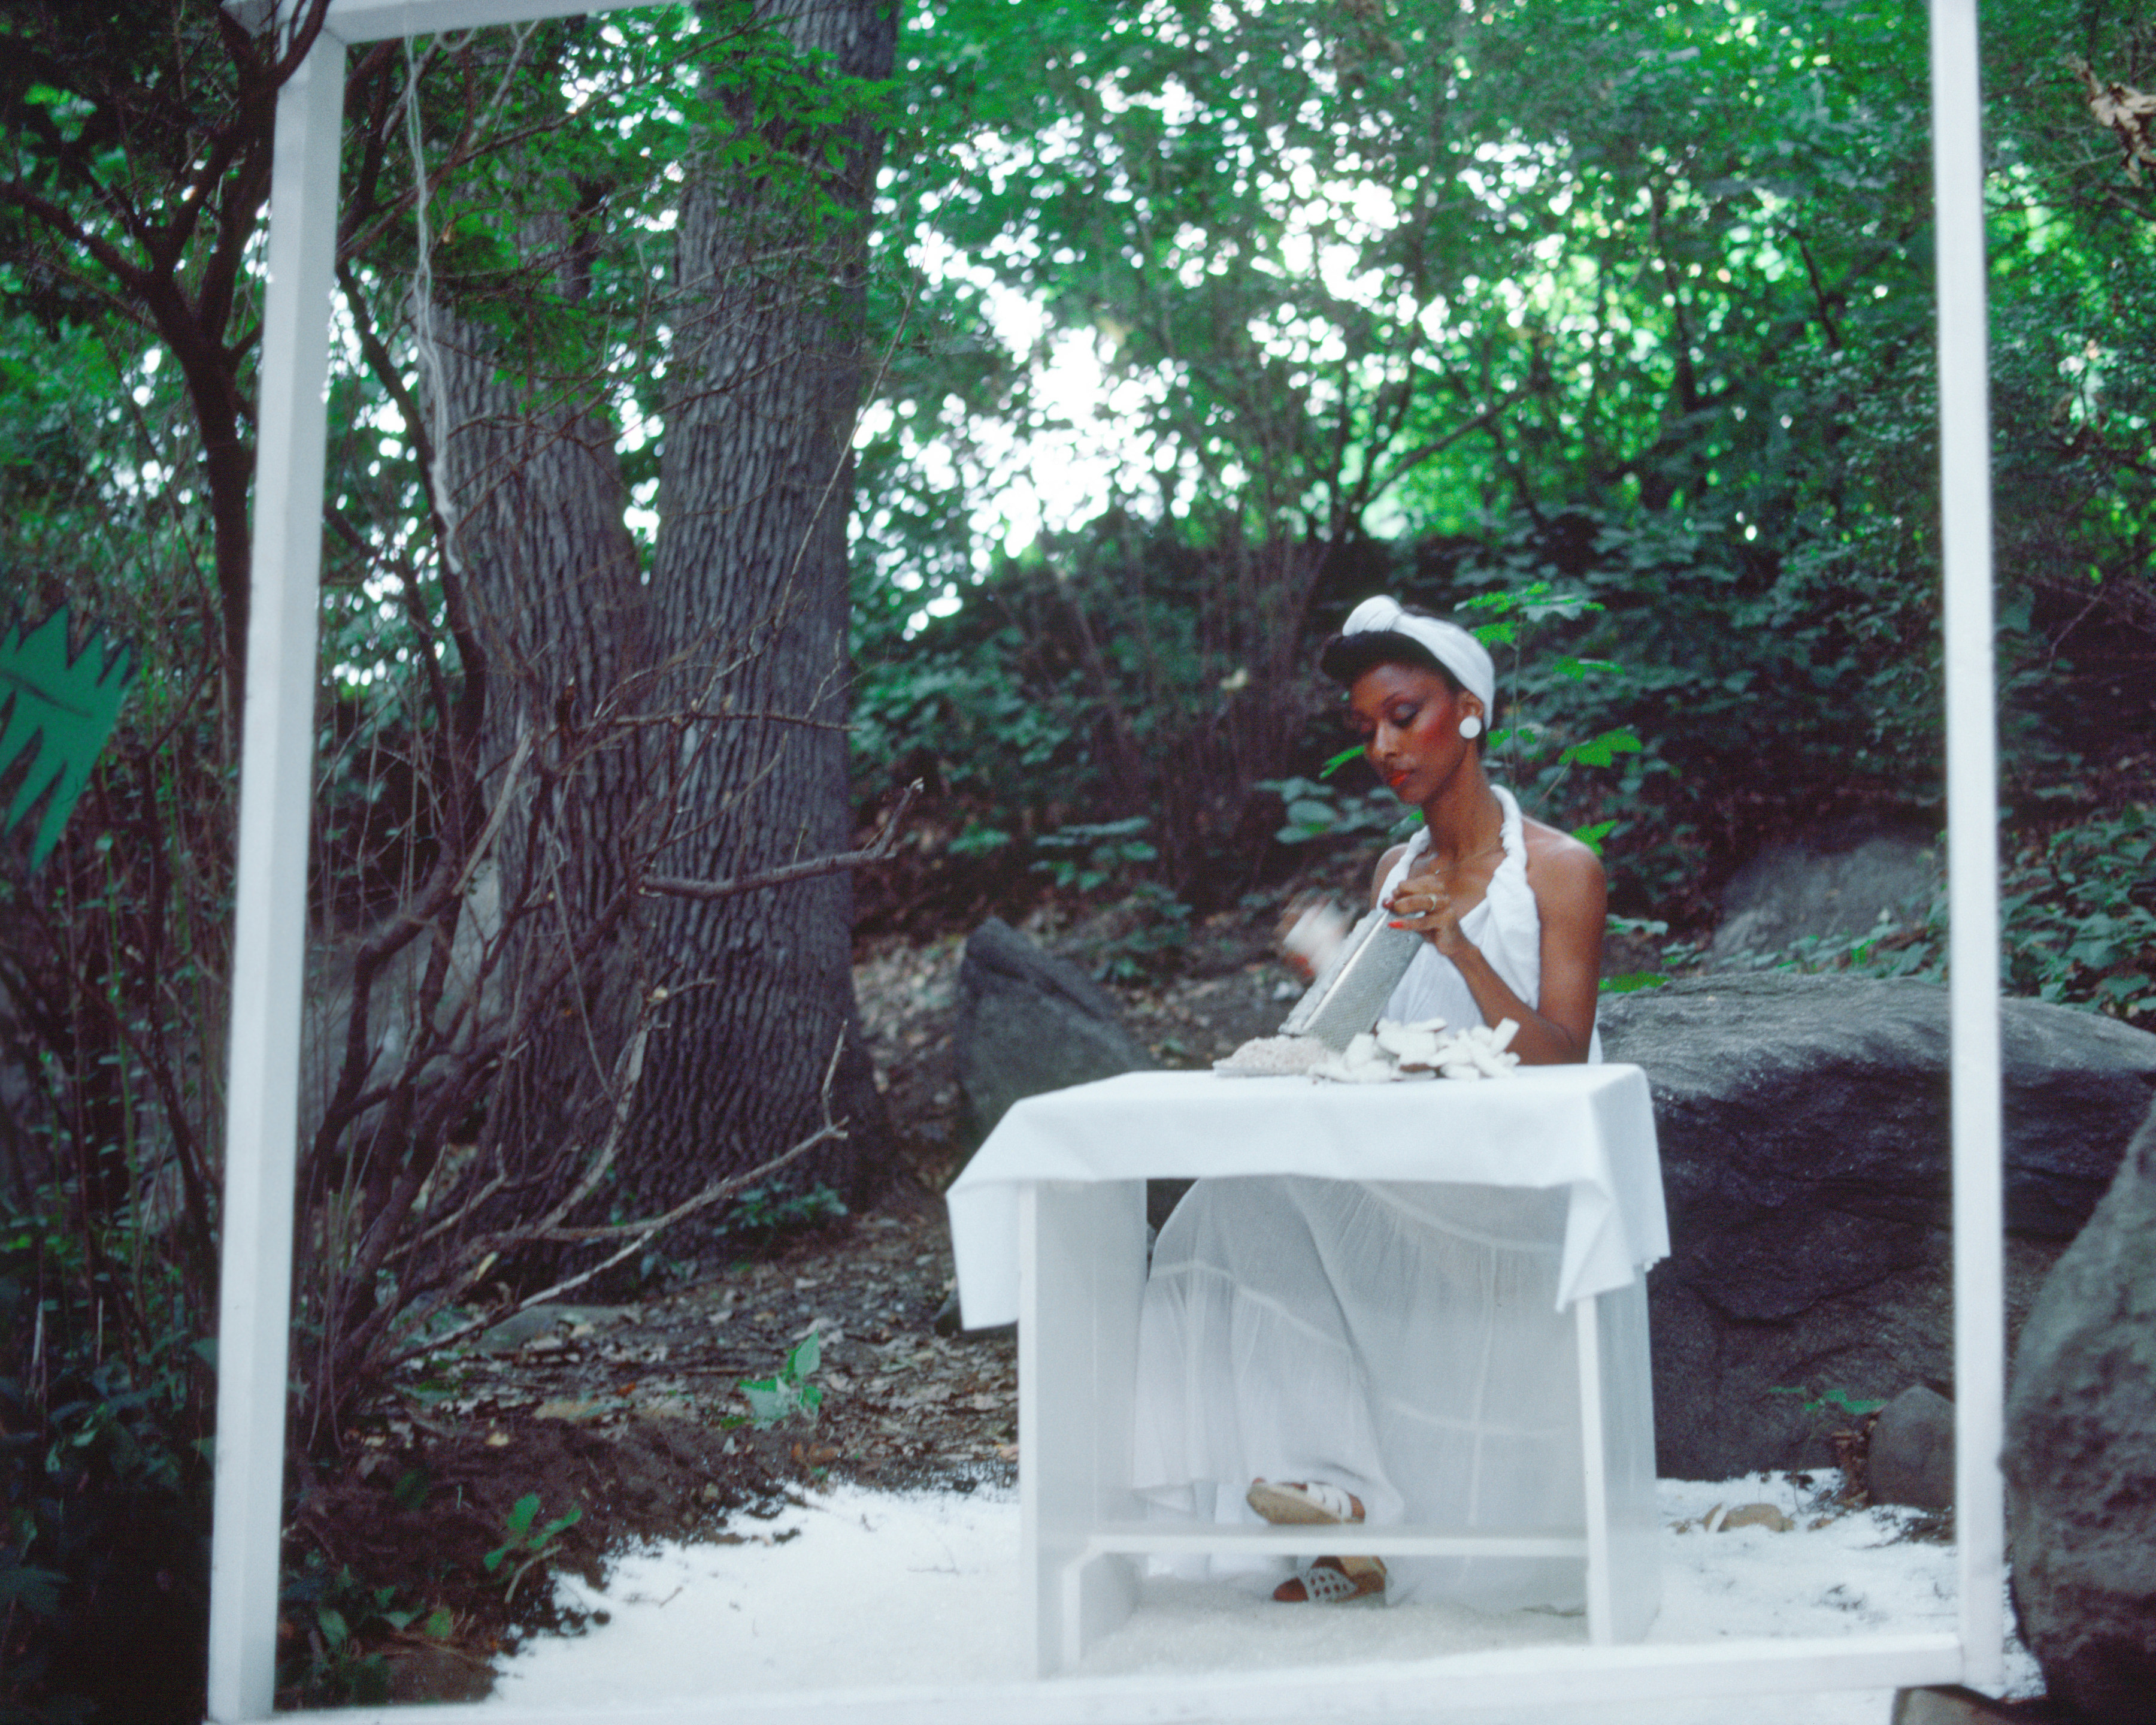 Rivers, First Draft: The Woman in White continues grating coconut, 1982/2015, Digital C-print from Kodachrome 35mm slides in 48 parts, 16h x 20w in (40.64h x 50.80w cm)